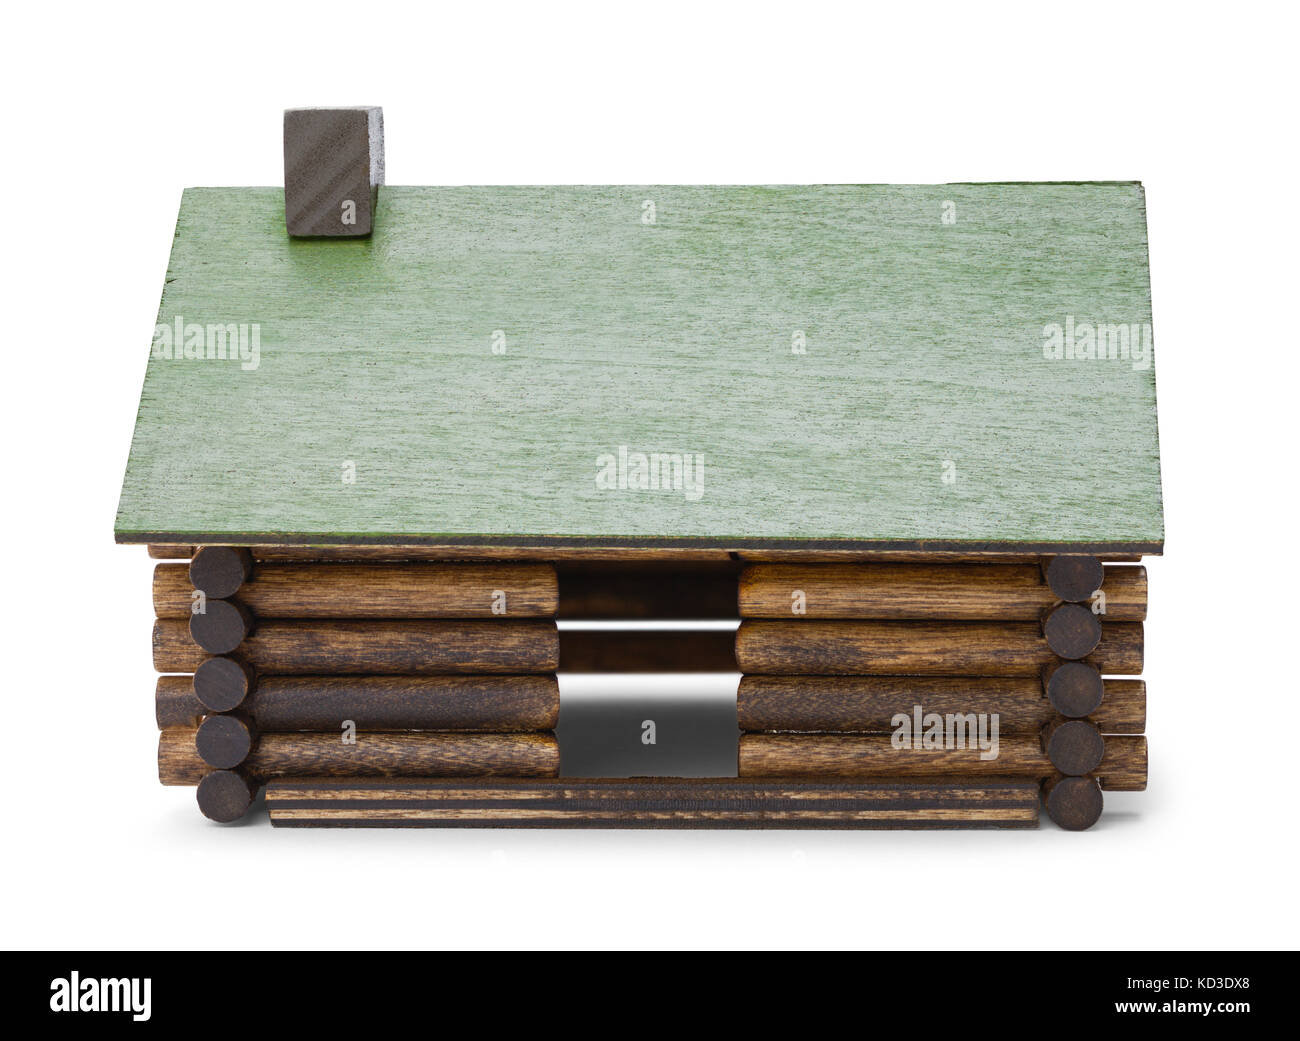 Toy Log Cabin Isolated on a White Background. Stock Photo